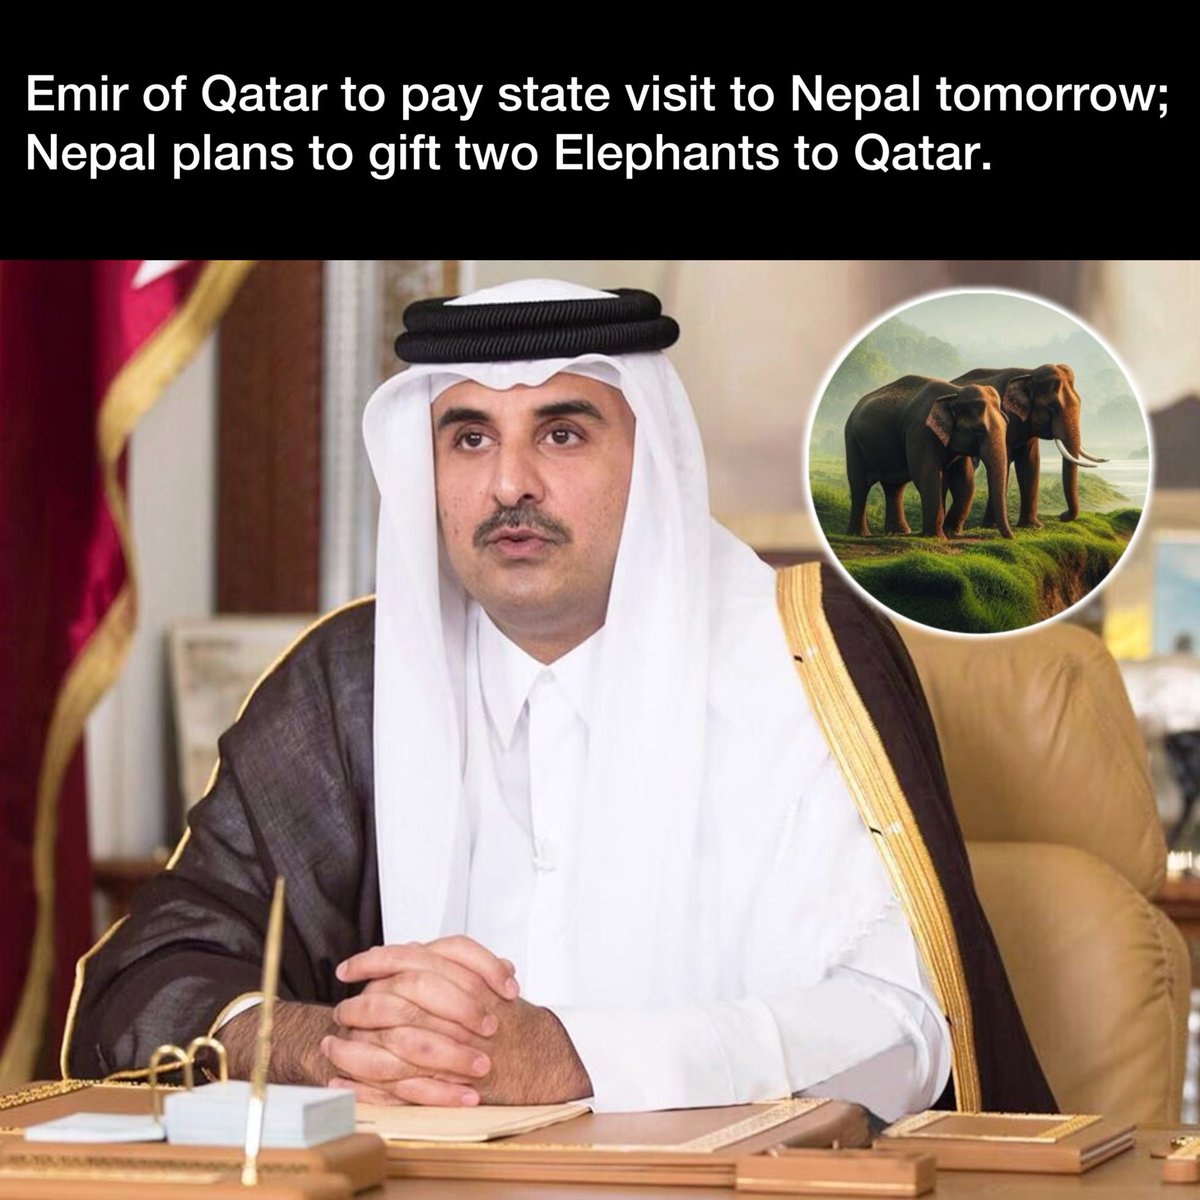 Sheikh Tamim bin Hamad Al-Thani, Emir of Qatar, is paying a State Visit to Nepal on April 23 and 24, the Ministry of Foreign Affairs stated.

His Highness Sheikh Tamim bin Hamad Al-Thani, will meet President Ram Chandra Paudel and Prime Minister Prachanda during his visit.